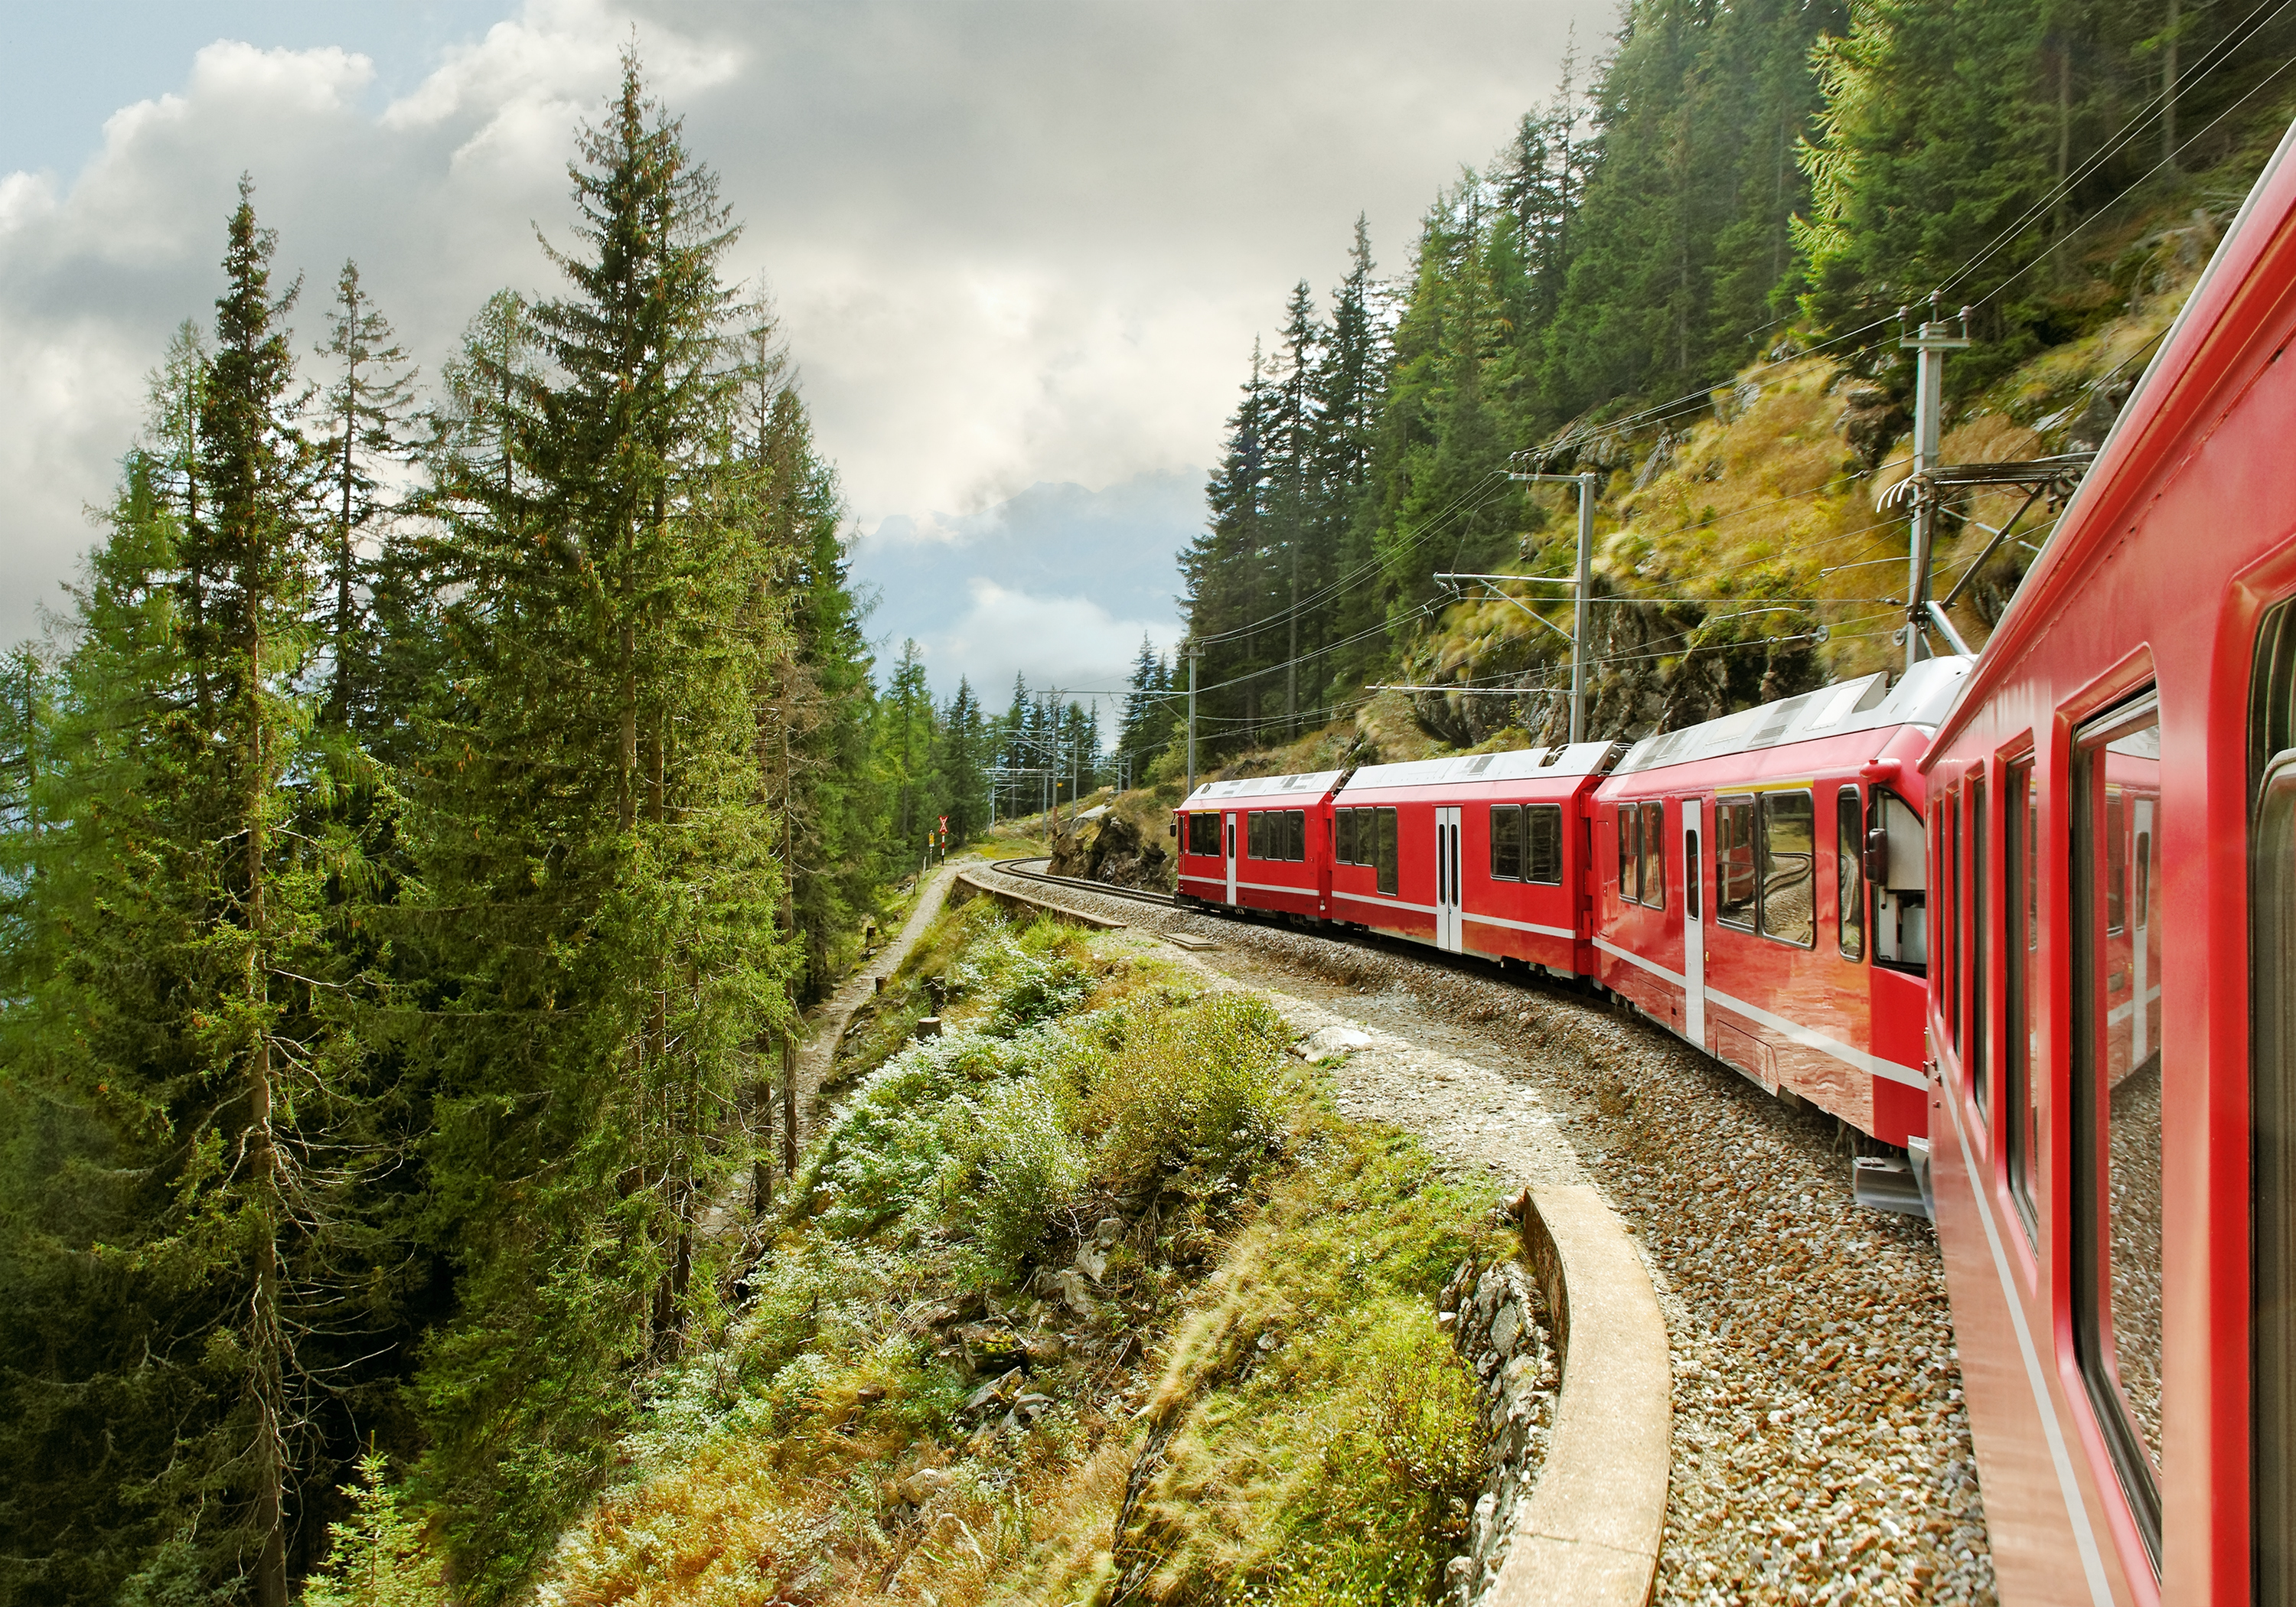 Railbookers®  Worldwide, Independent Train Vacation Packages